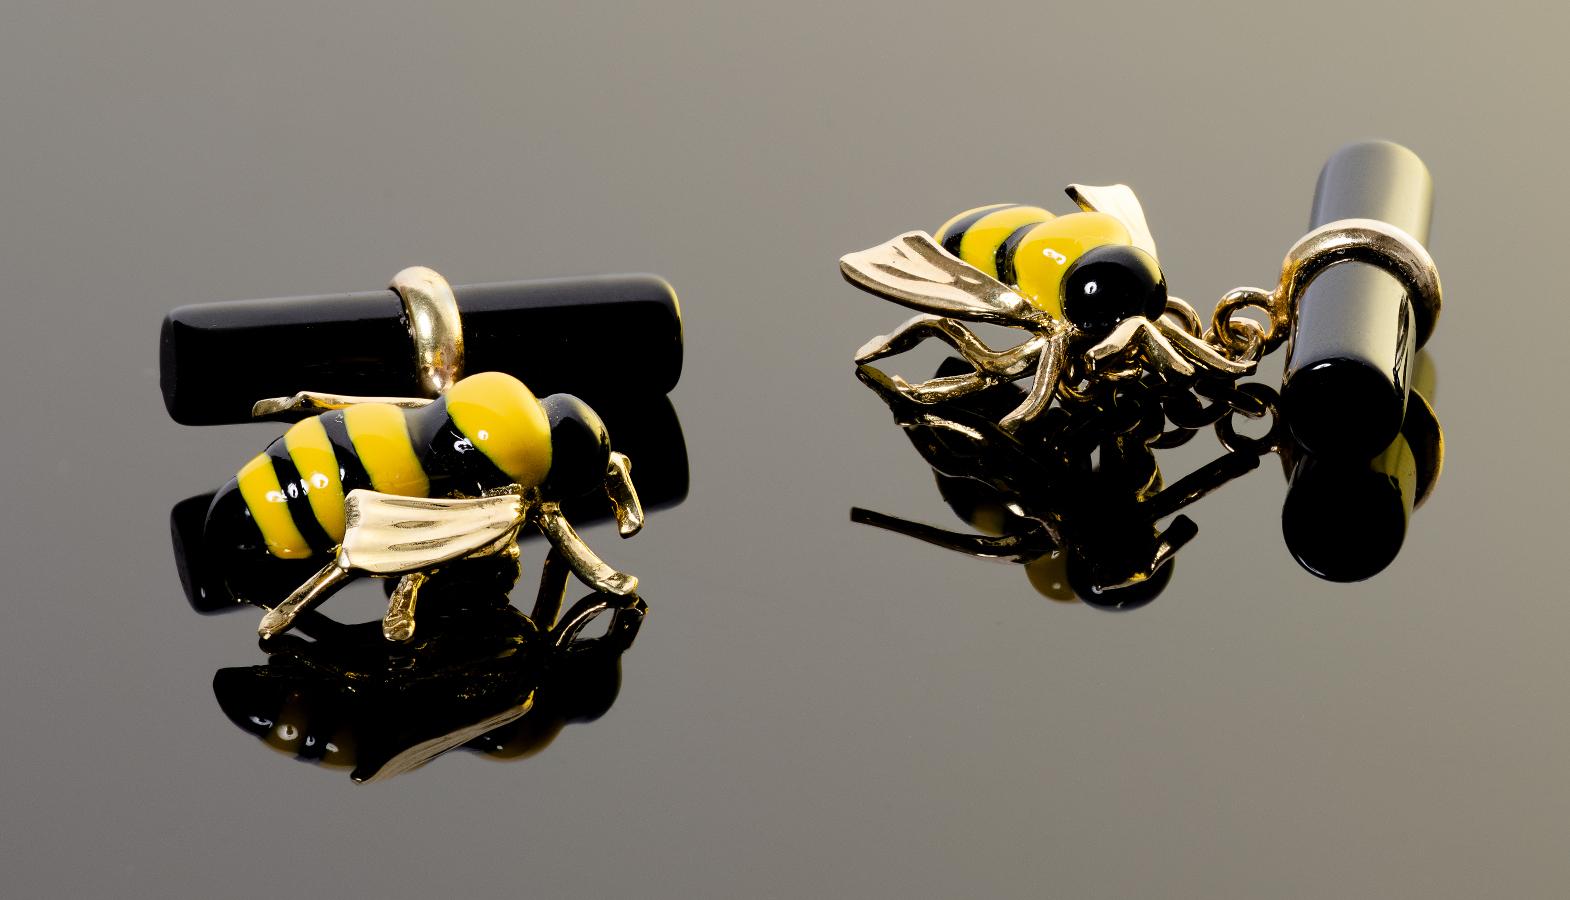 Pair of cufflinks with black and yellow enamel realistically depicting a bee.

Chain link connections with onyx baton.

Mounted in 18Kt yellow gold